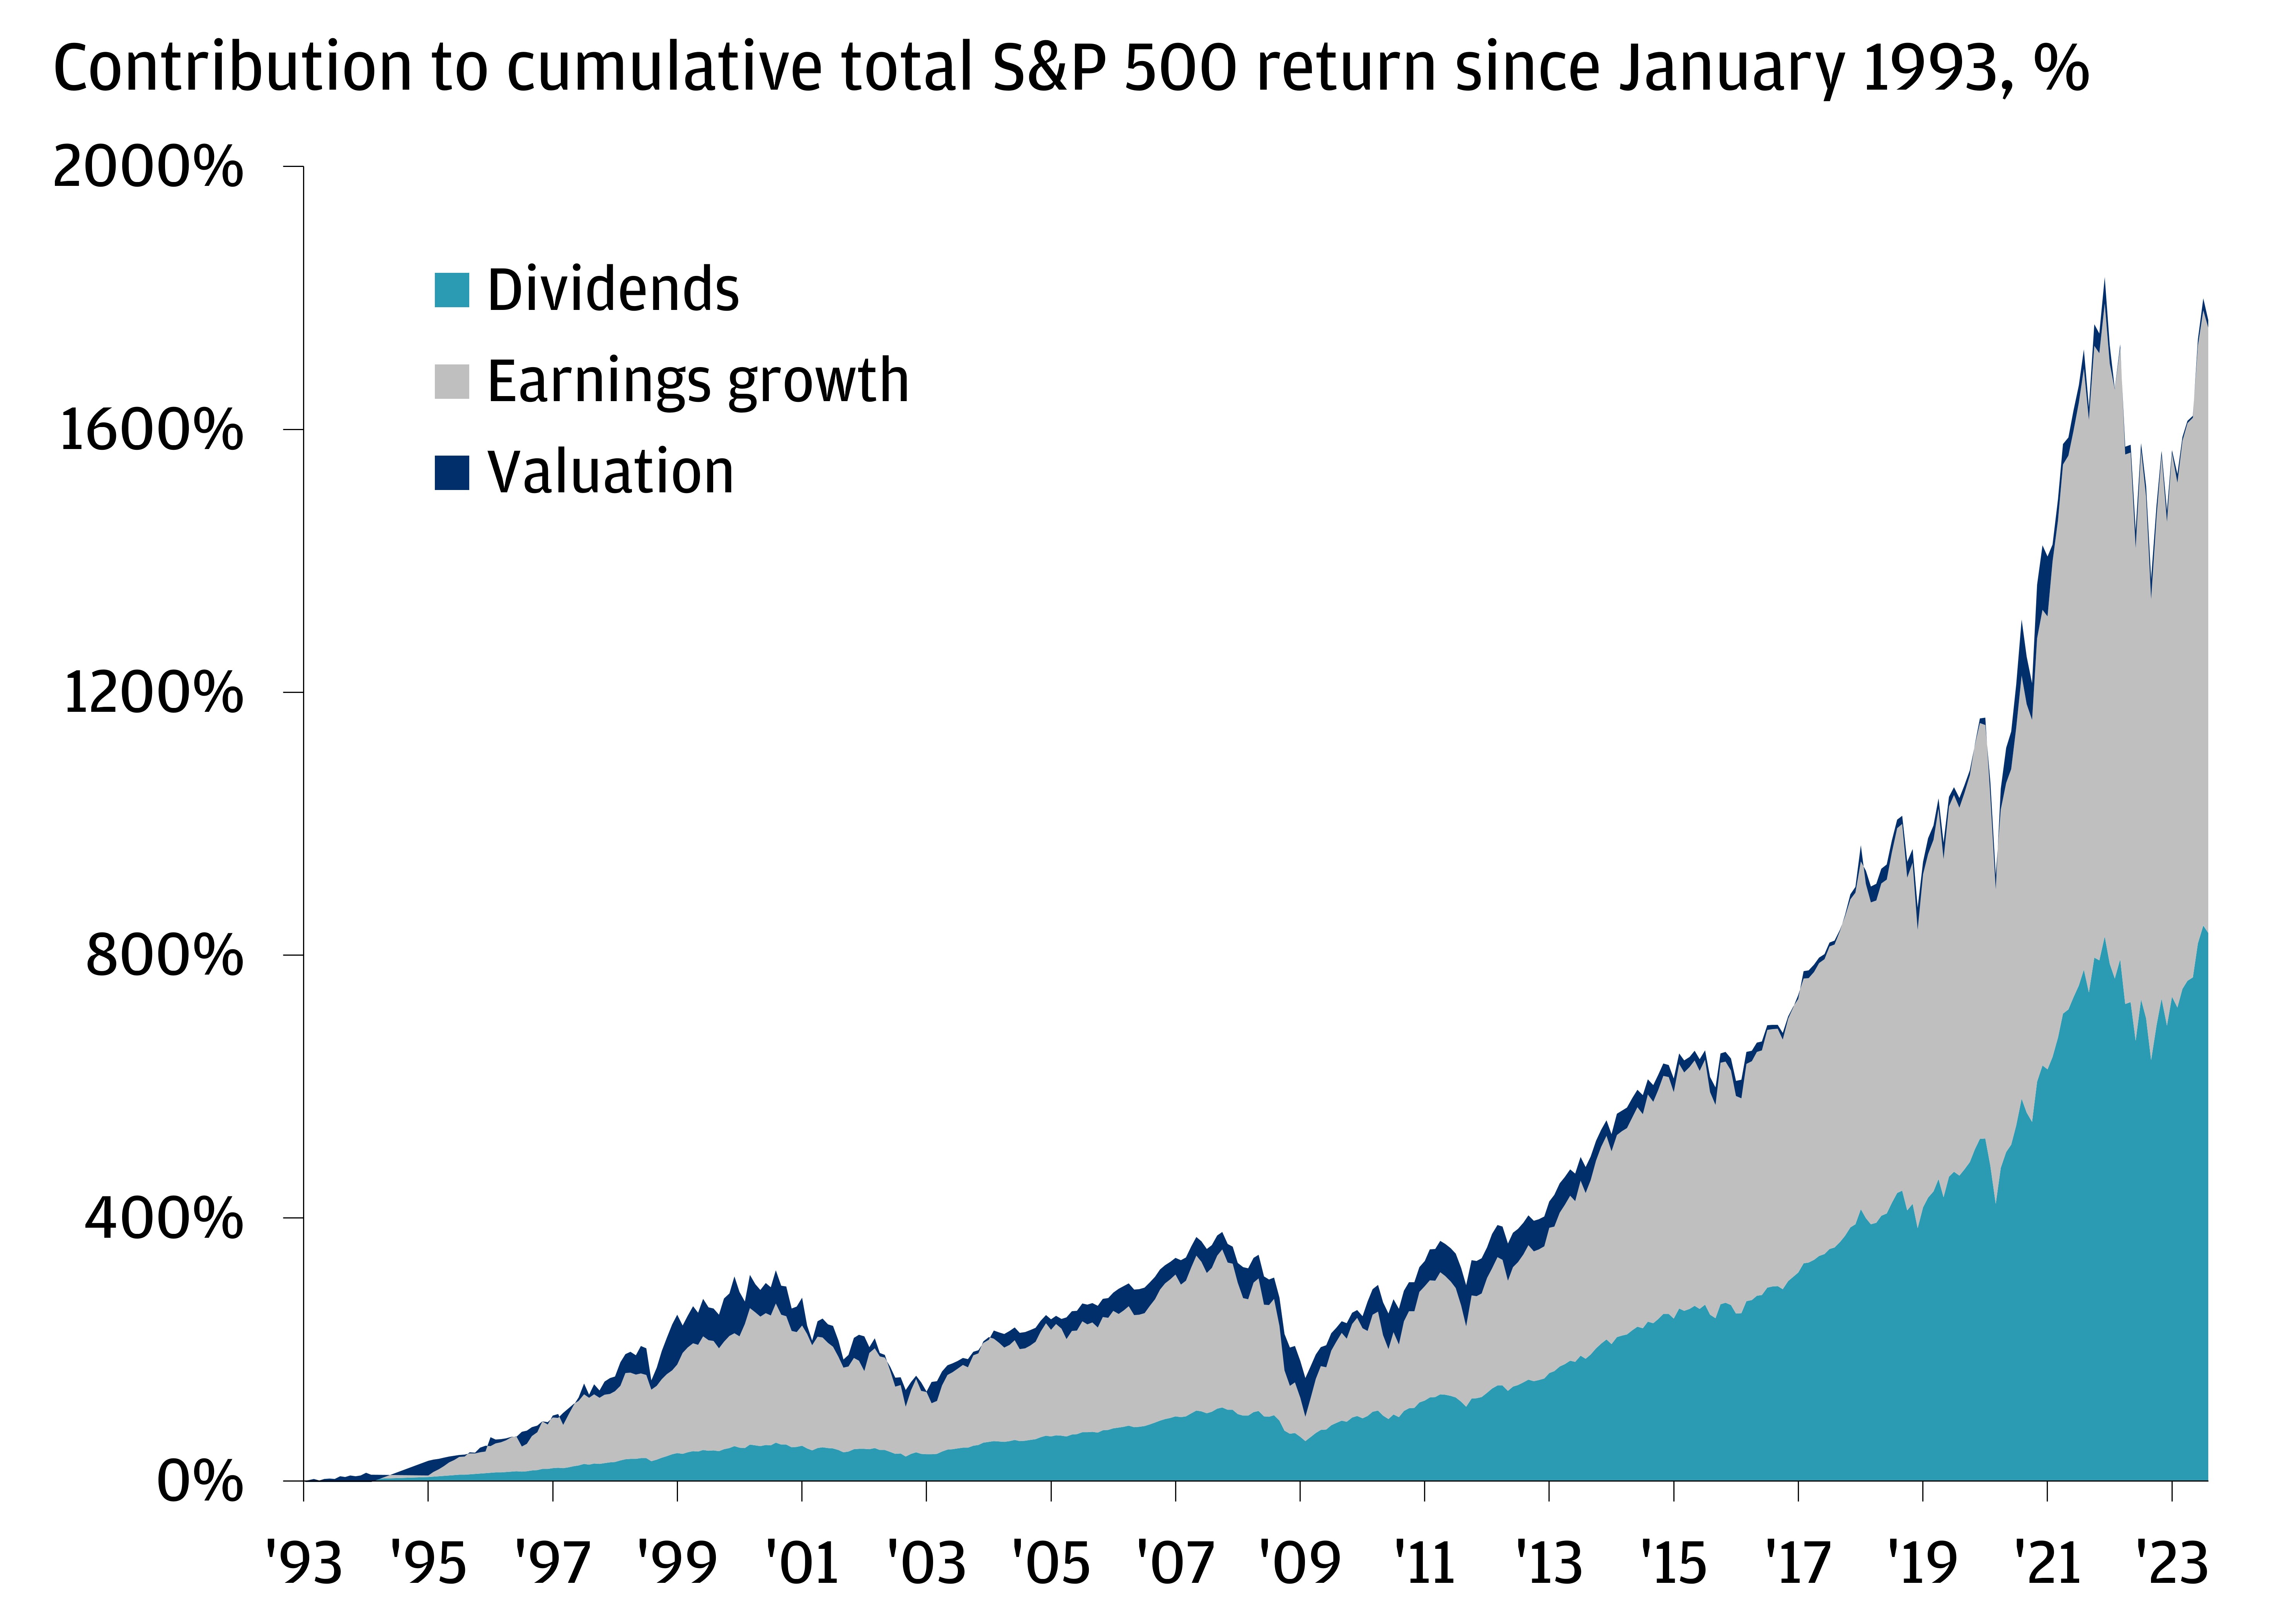 This chart shows the contribution to cumulative total S&P return since January 1993 to August 30, 2023.